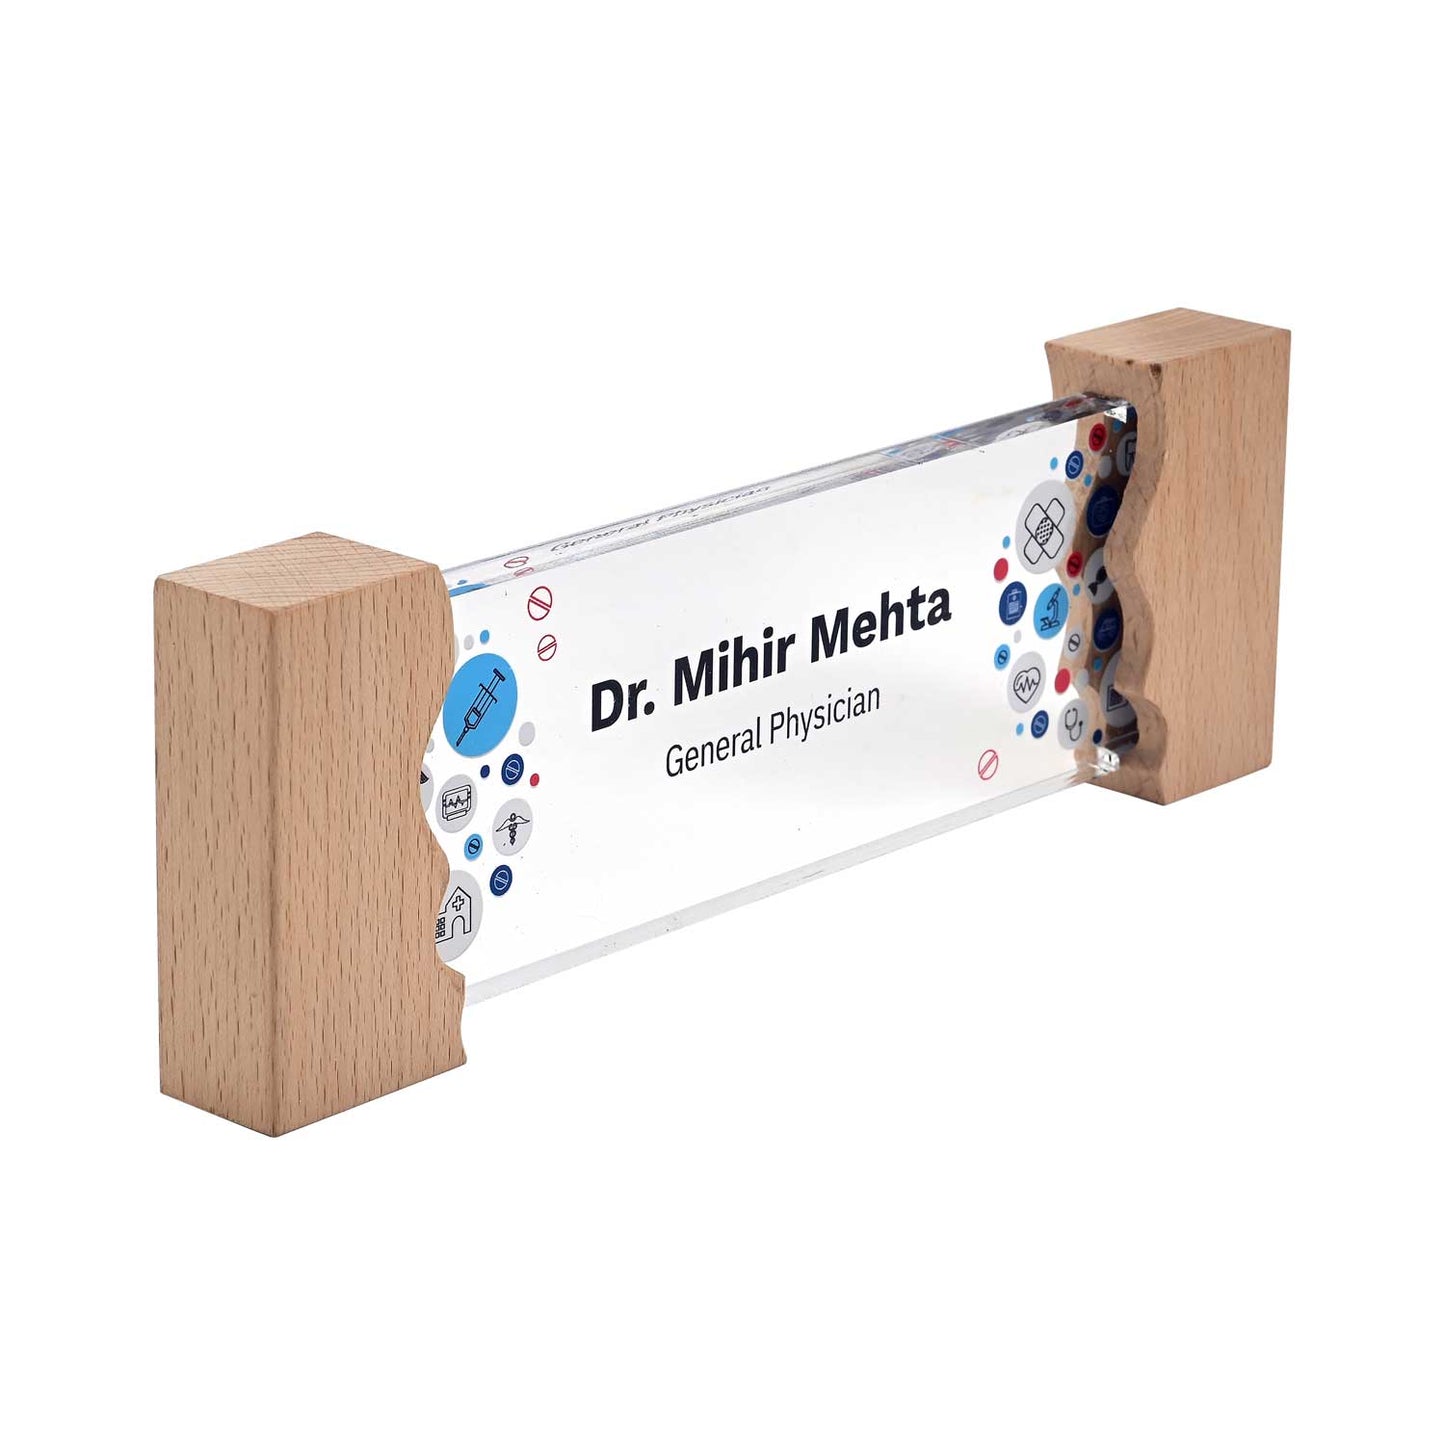 Doctor's Prescription Desk Name Plate with Wooden Stand